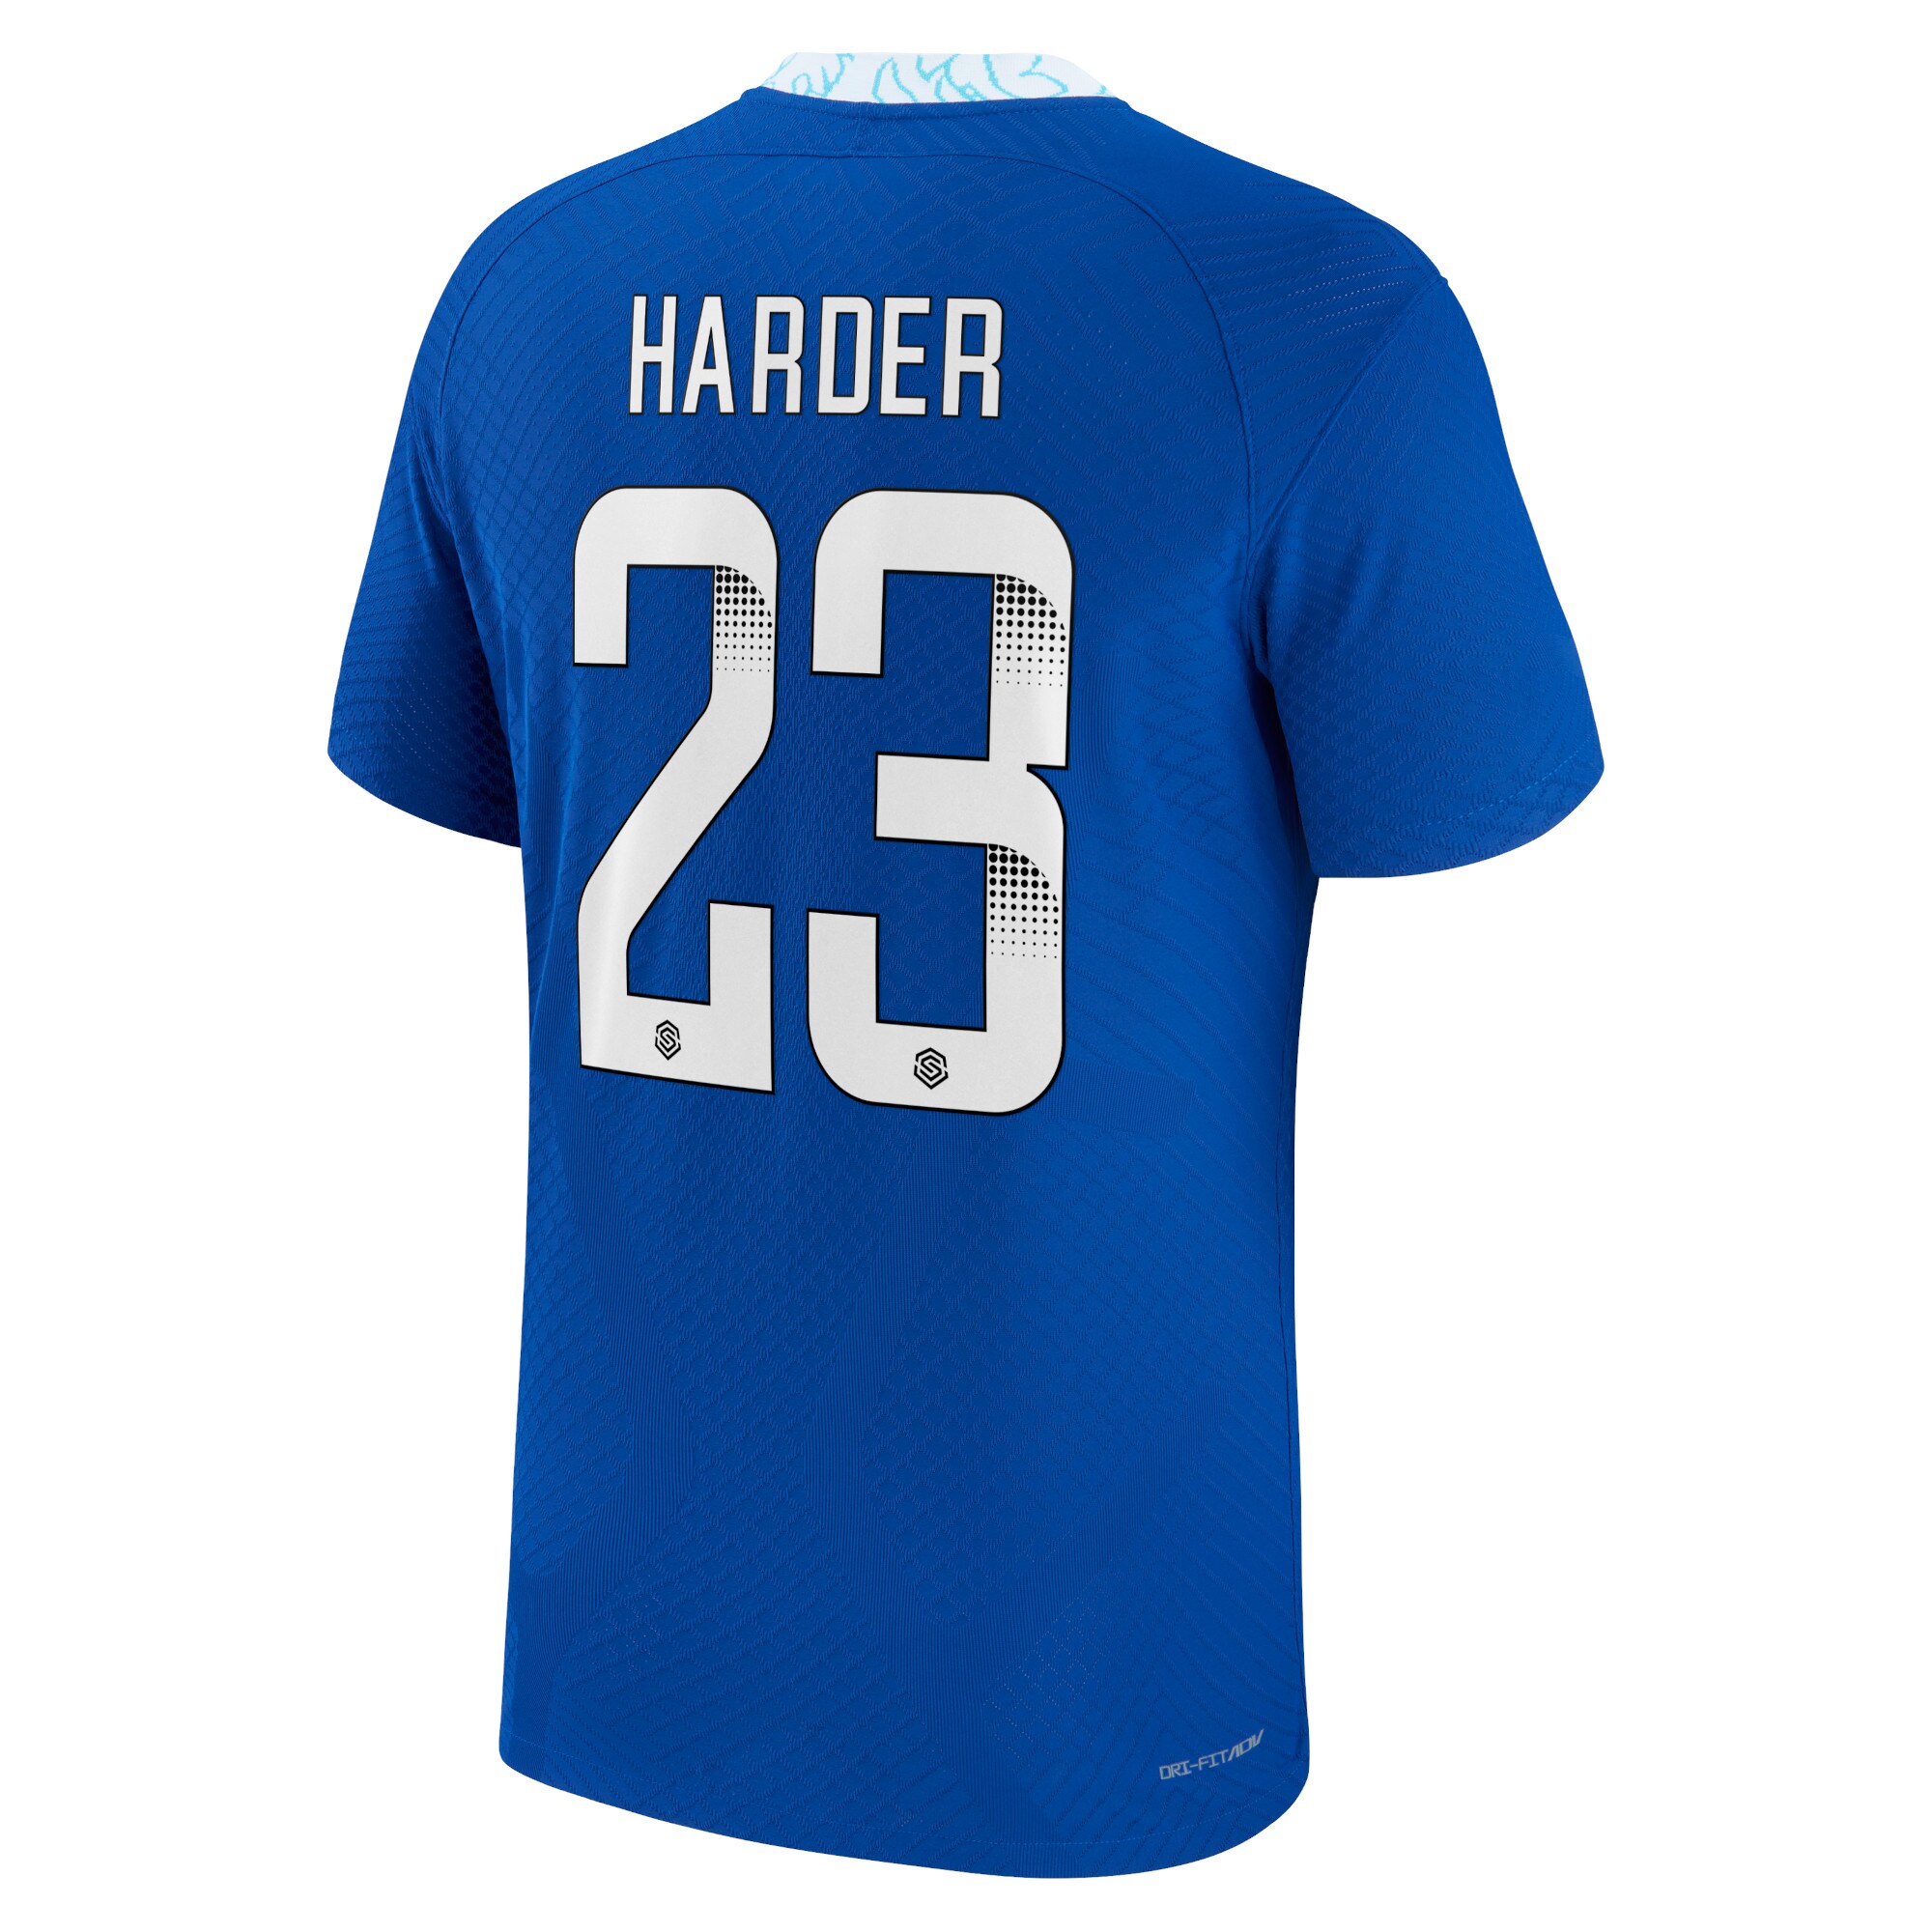 Chelsea WSL Home Vapor Match Shirt 2022-23 with Harder 23 printing